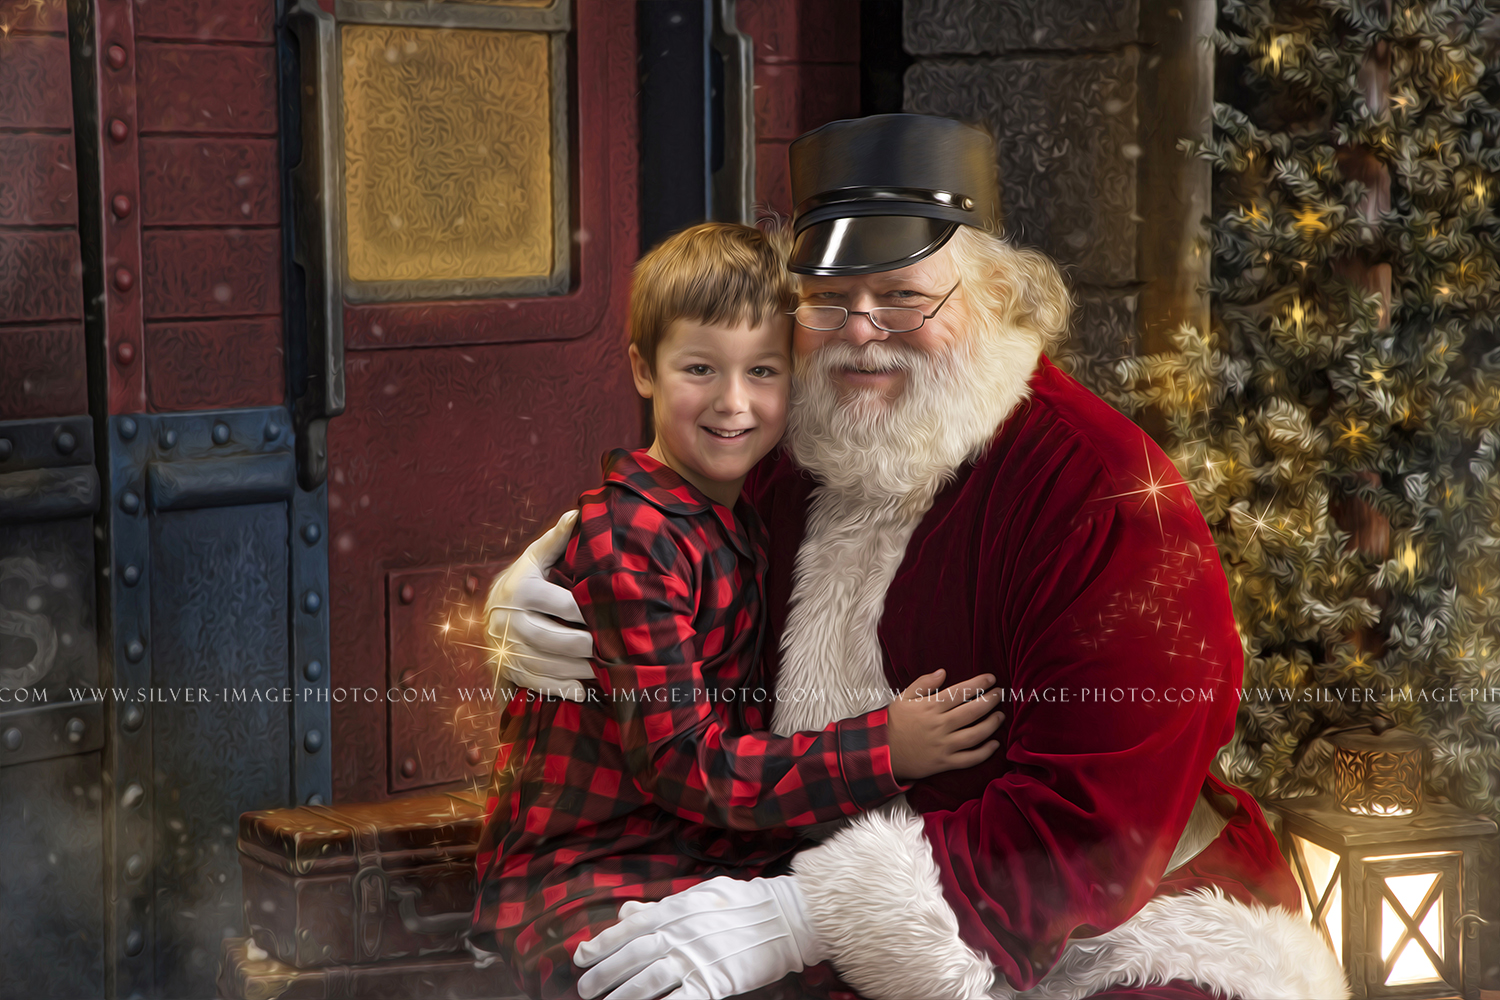 Silver Image Photography - Real bearded Santa photos in Spring, TX https://www.silver-image-photo.com